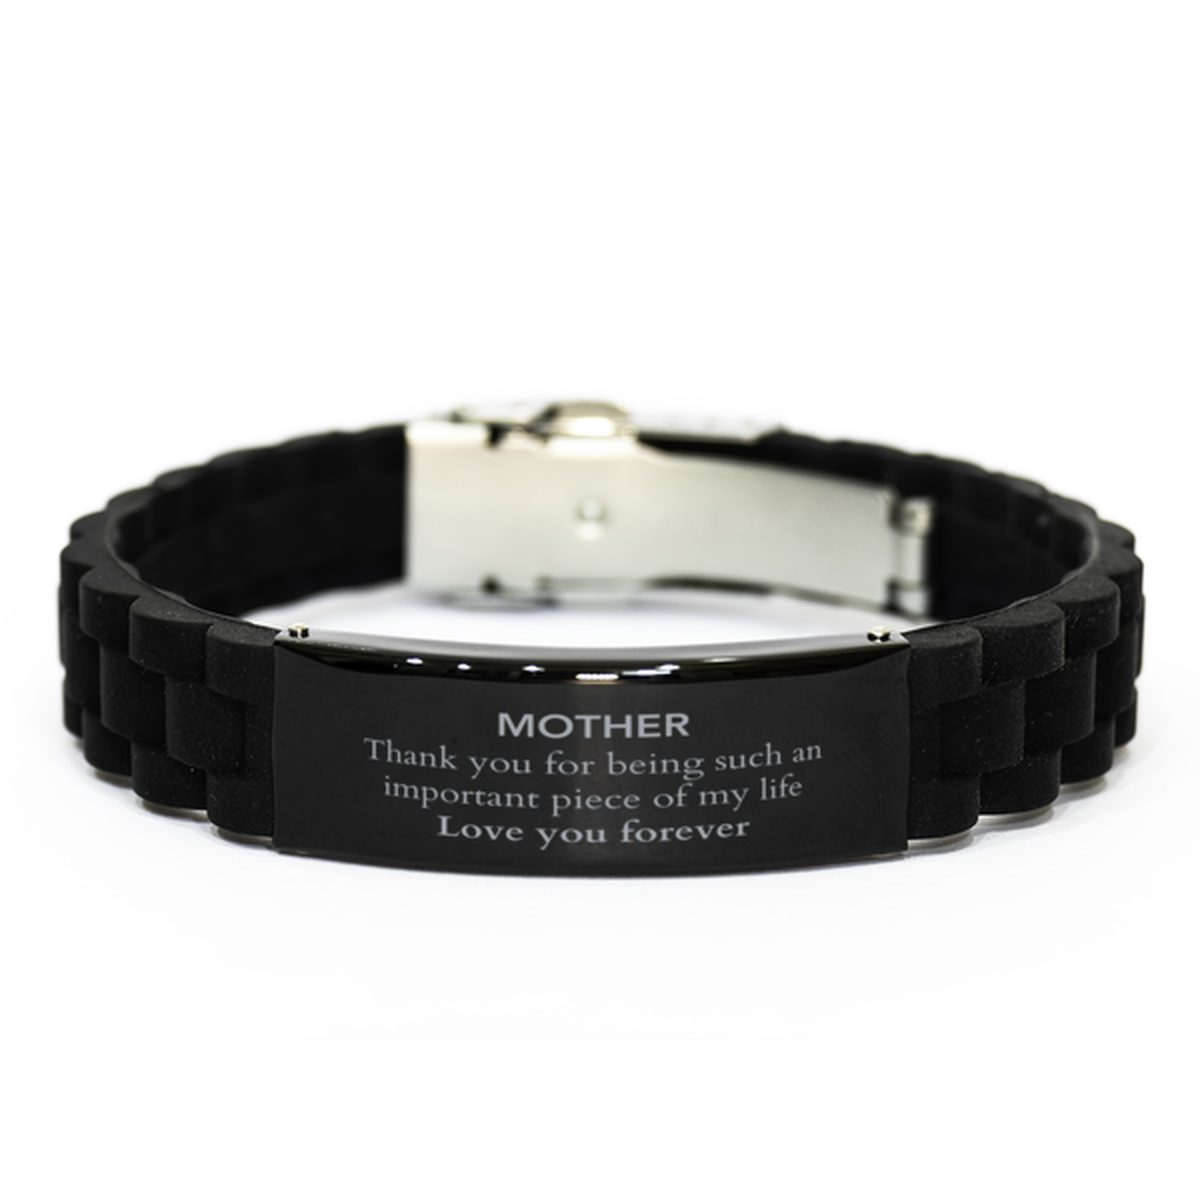 Appropriate Mother Black Glidelock Clasp Bracelet Epic Birthday Gifts for Mother Thank you for being such an important piece of my life Mother Christmas Mothers Fathers Day